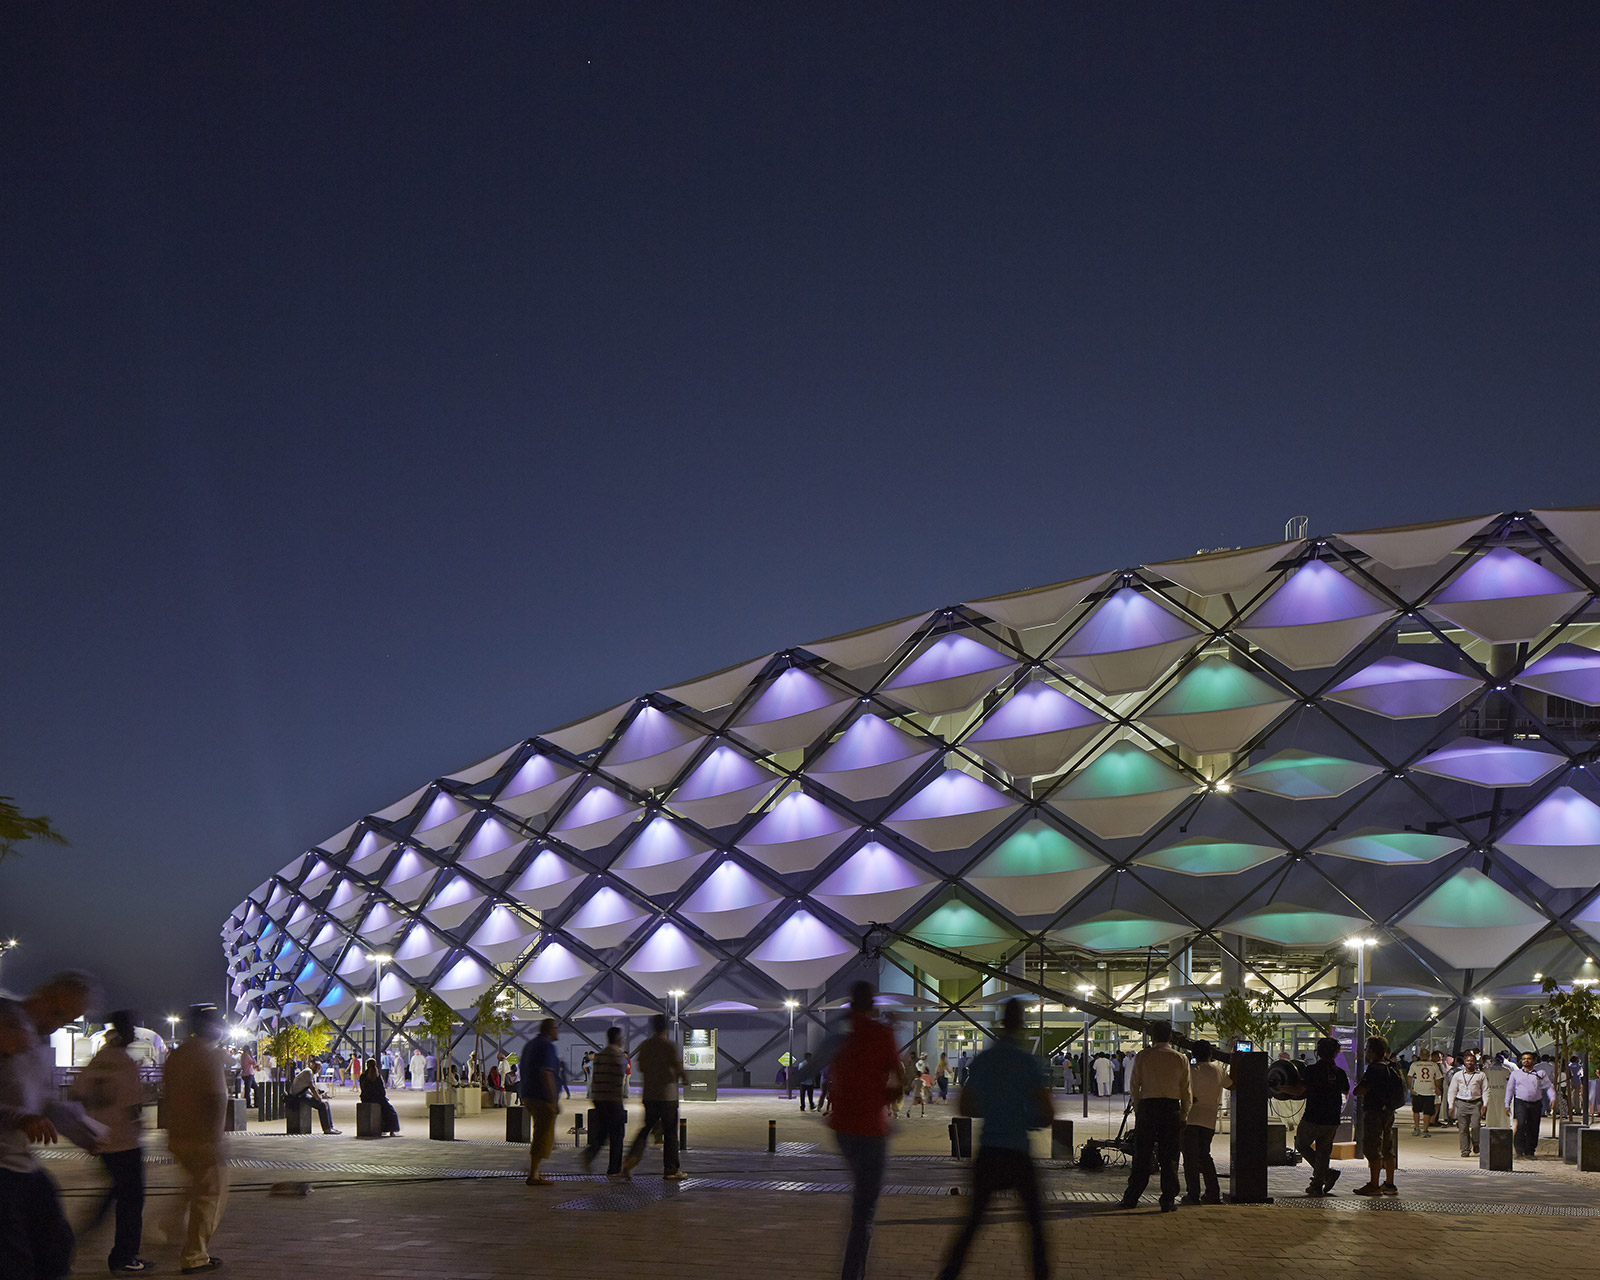 The new Hazza Bin Zayed stadium, Abu Dhabi. At the old stadium, matches achieved crowds in the region of 500, whilst the new stadium and enabling development has seen a change to capacity crowds for most matches.